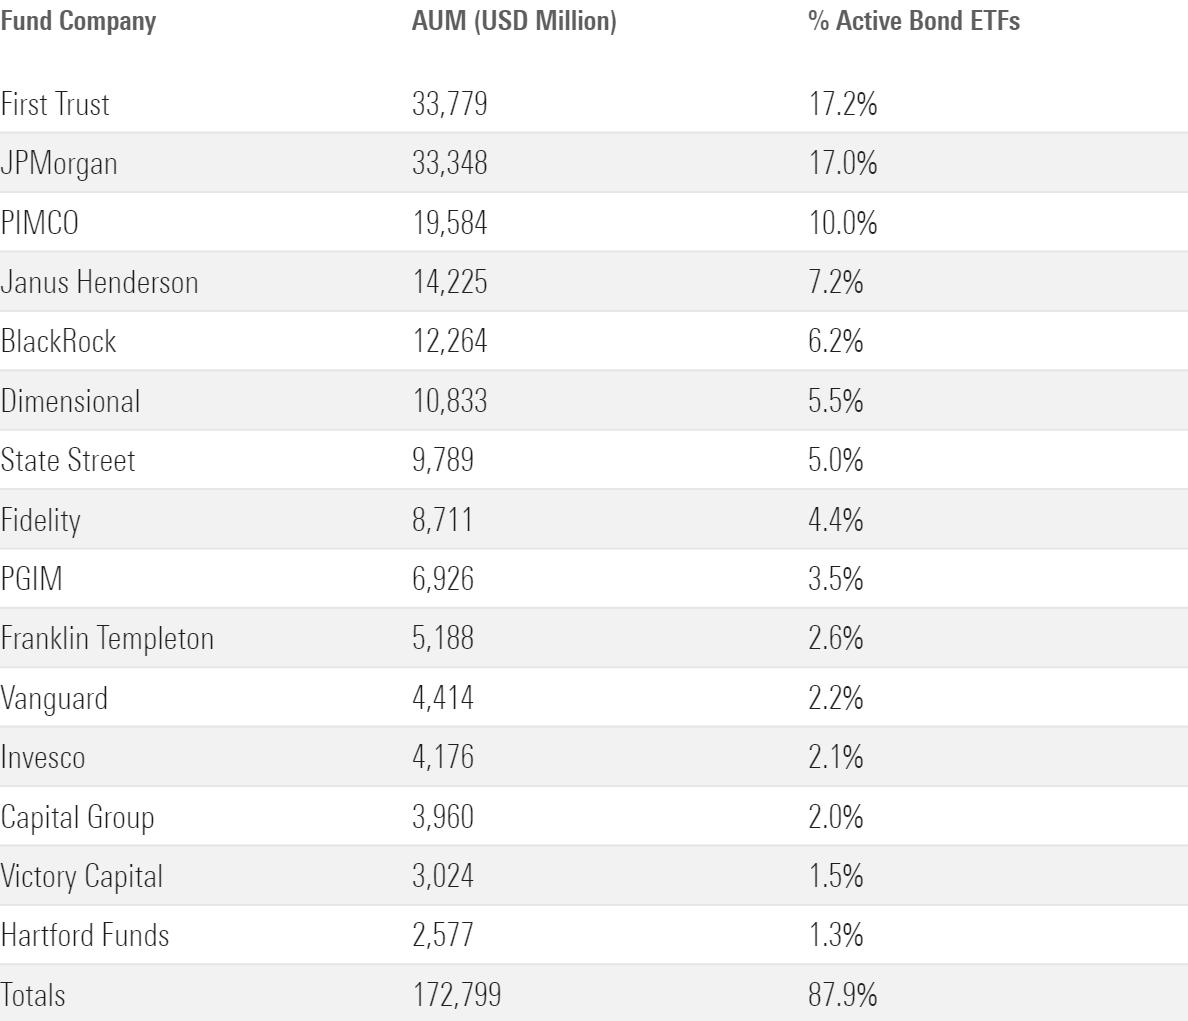 Table showing AUM and % of active bond ETF AUM by firm.